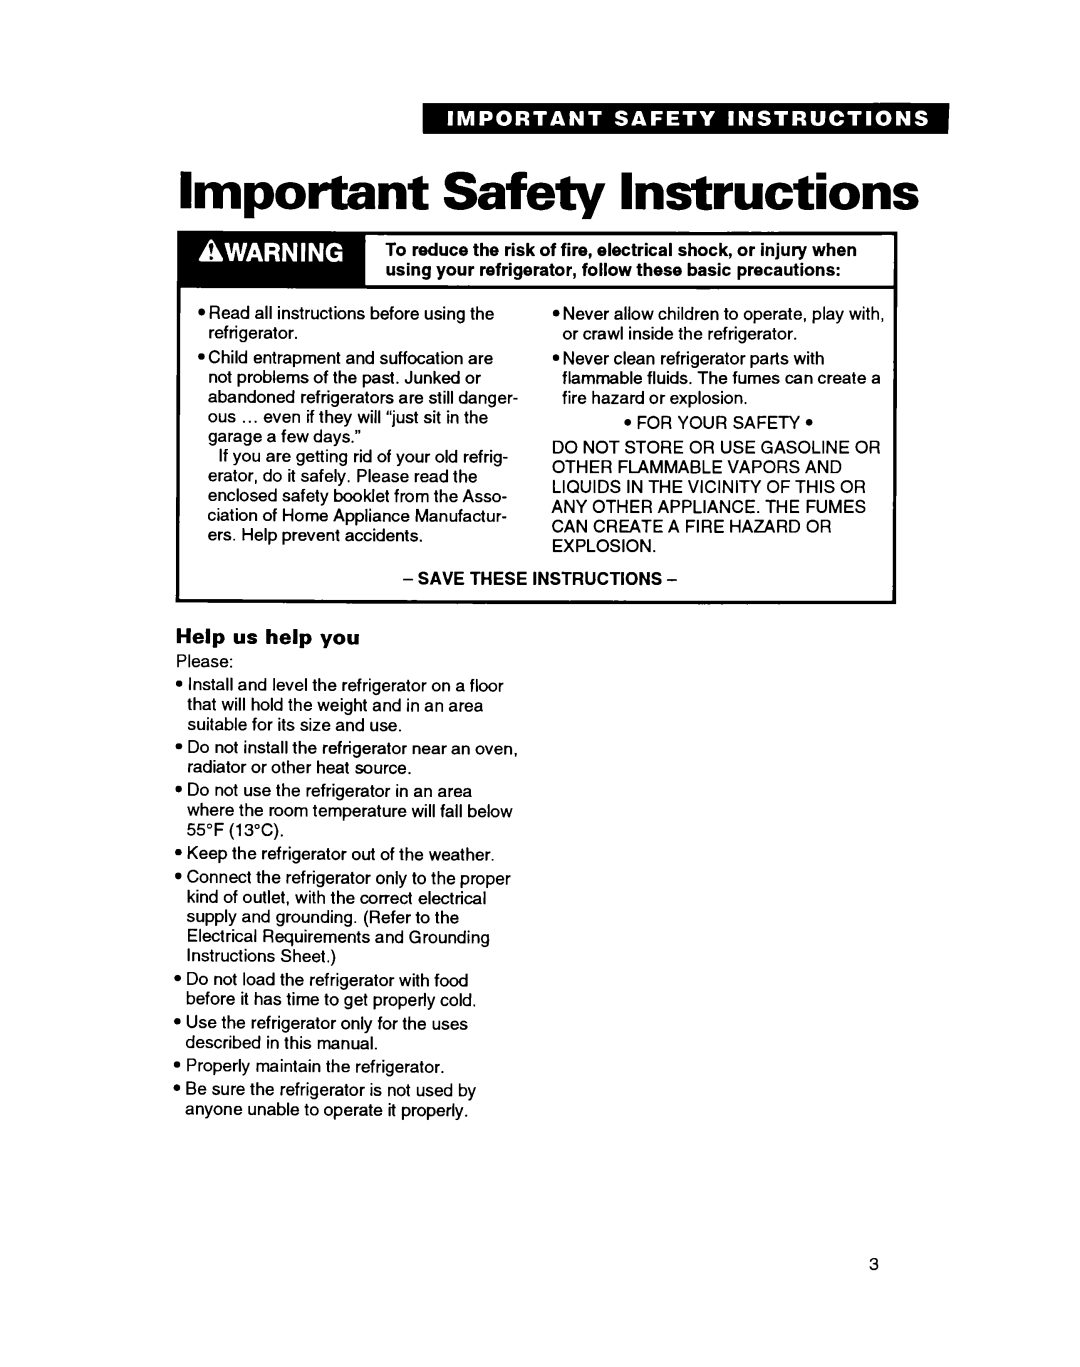 Whirlpool ET18GK warranty Important Safety Instructions, Help us help you 